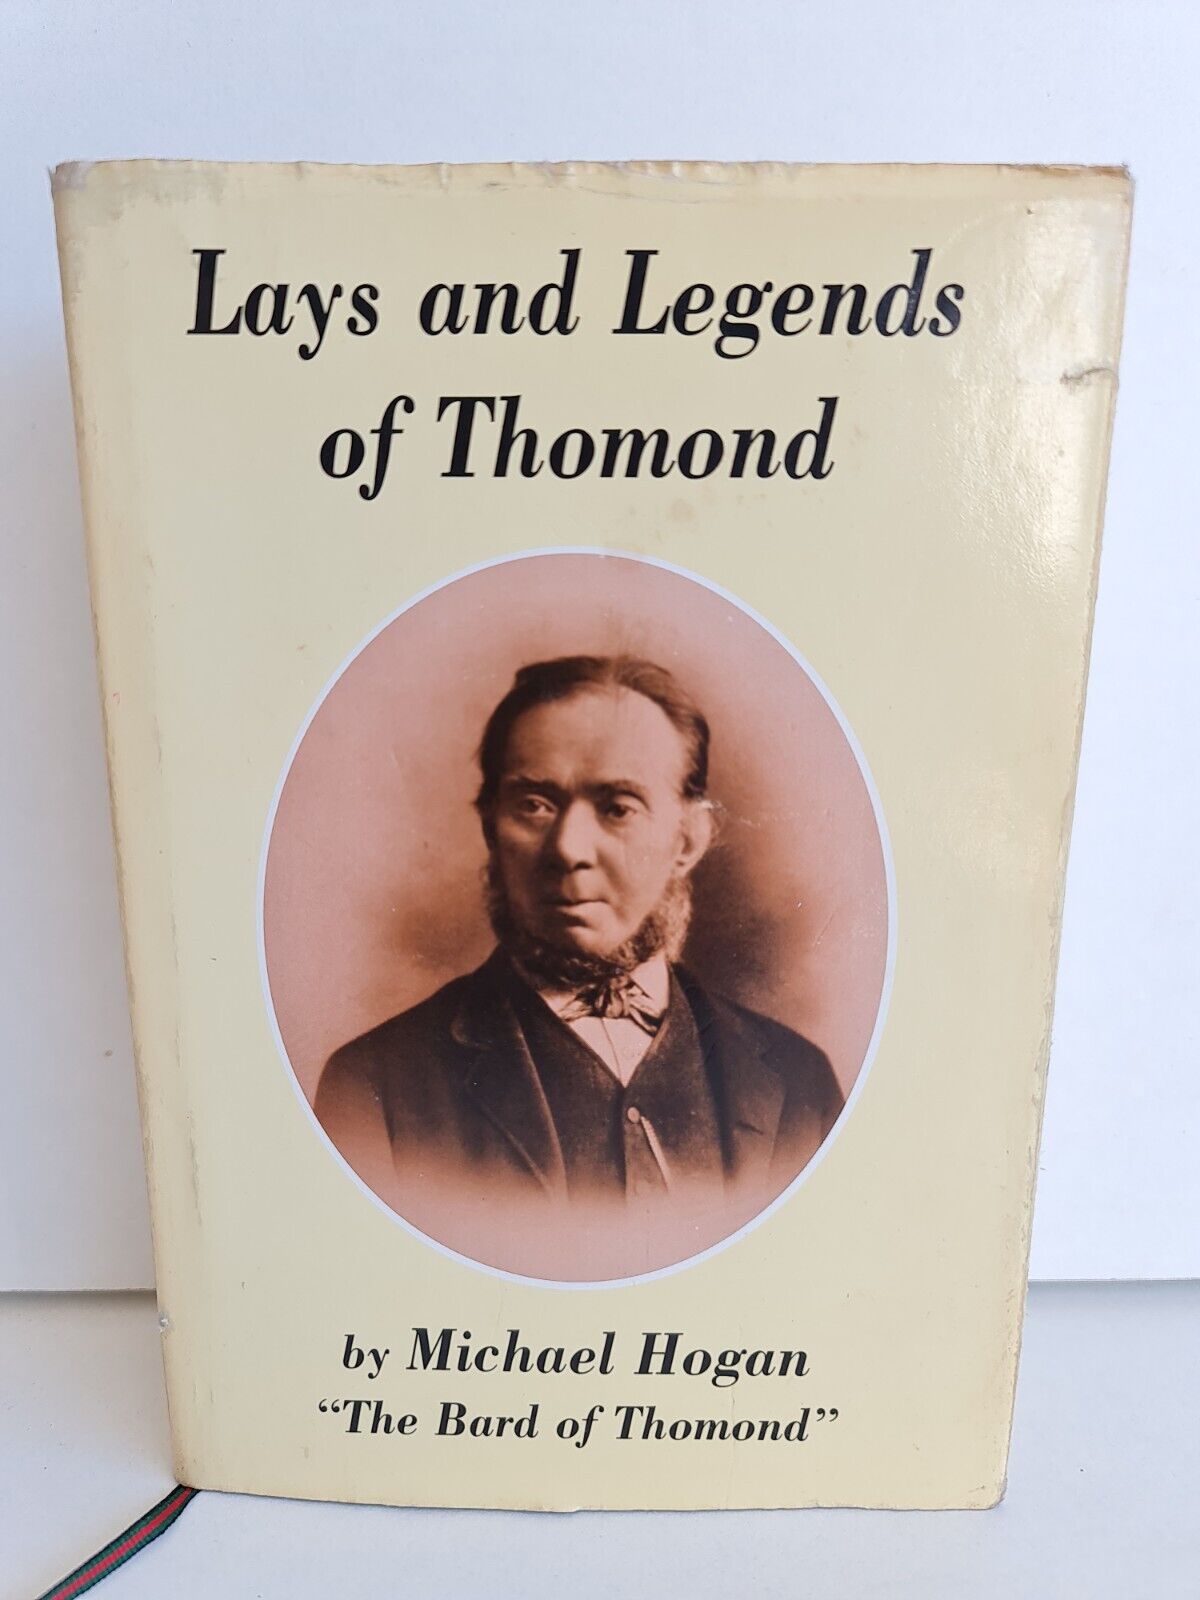 Lays and Legends of Thomond by Michael Hogan (1999)